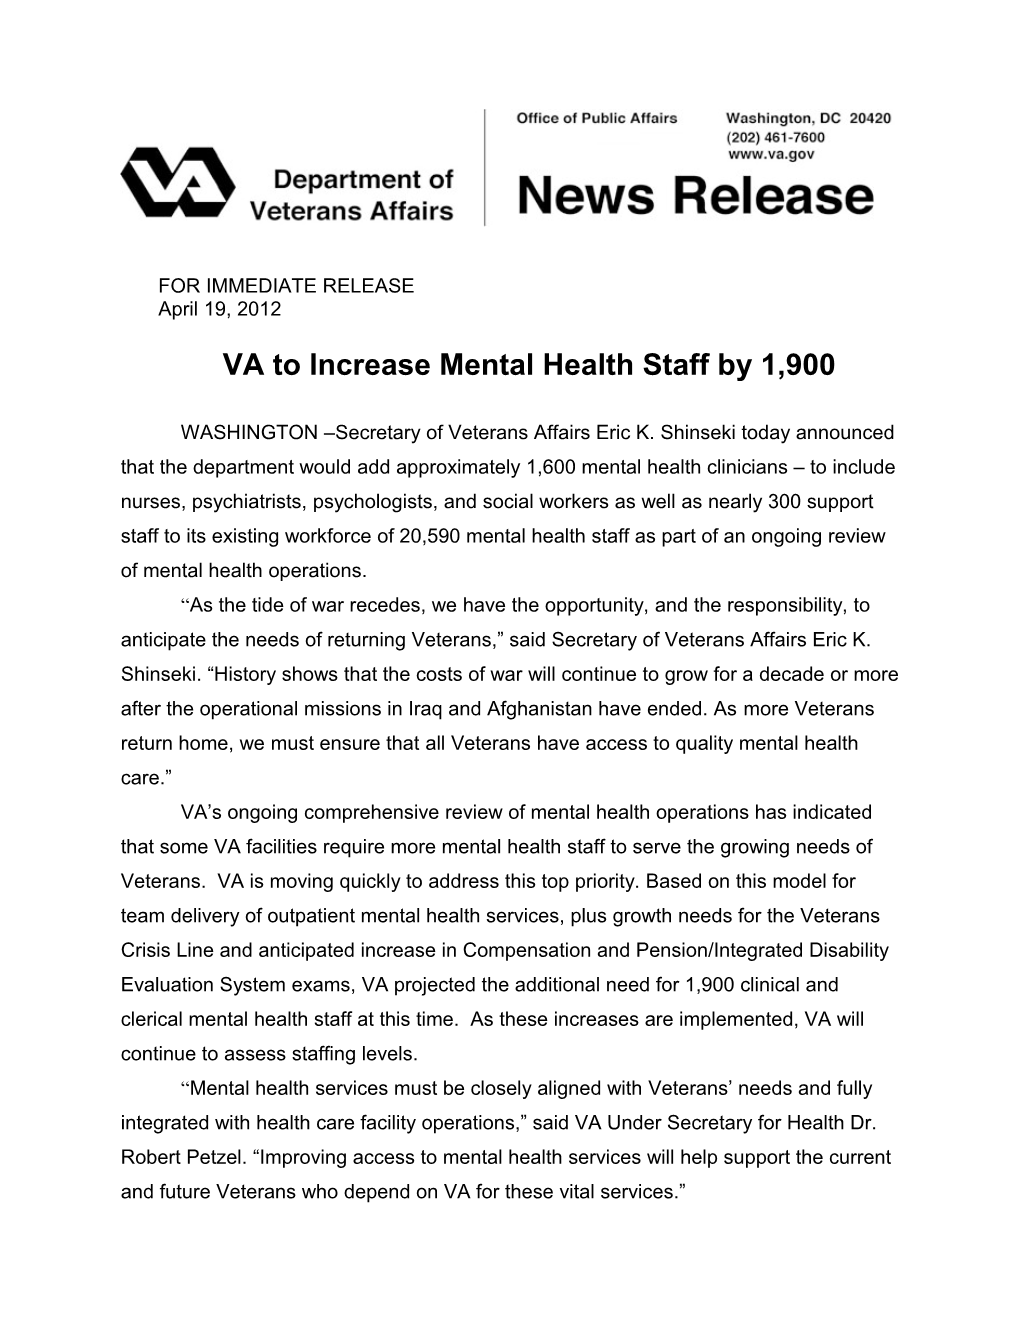 VA to Increase Mental Health Staff by 1,900